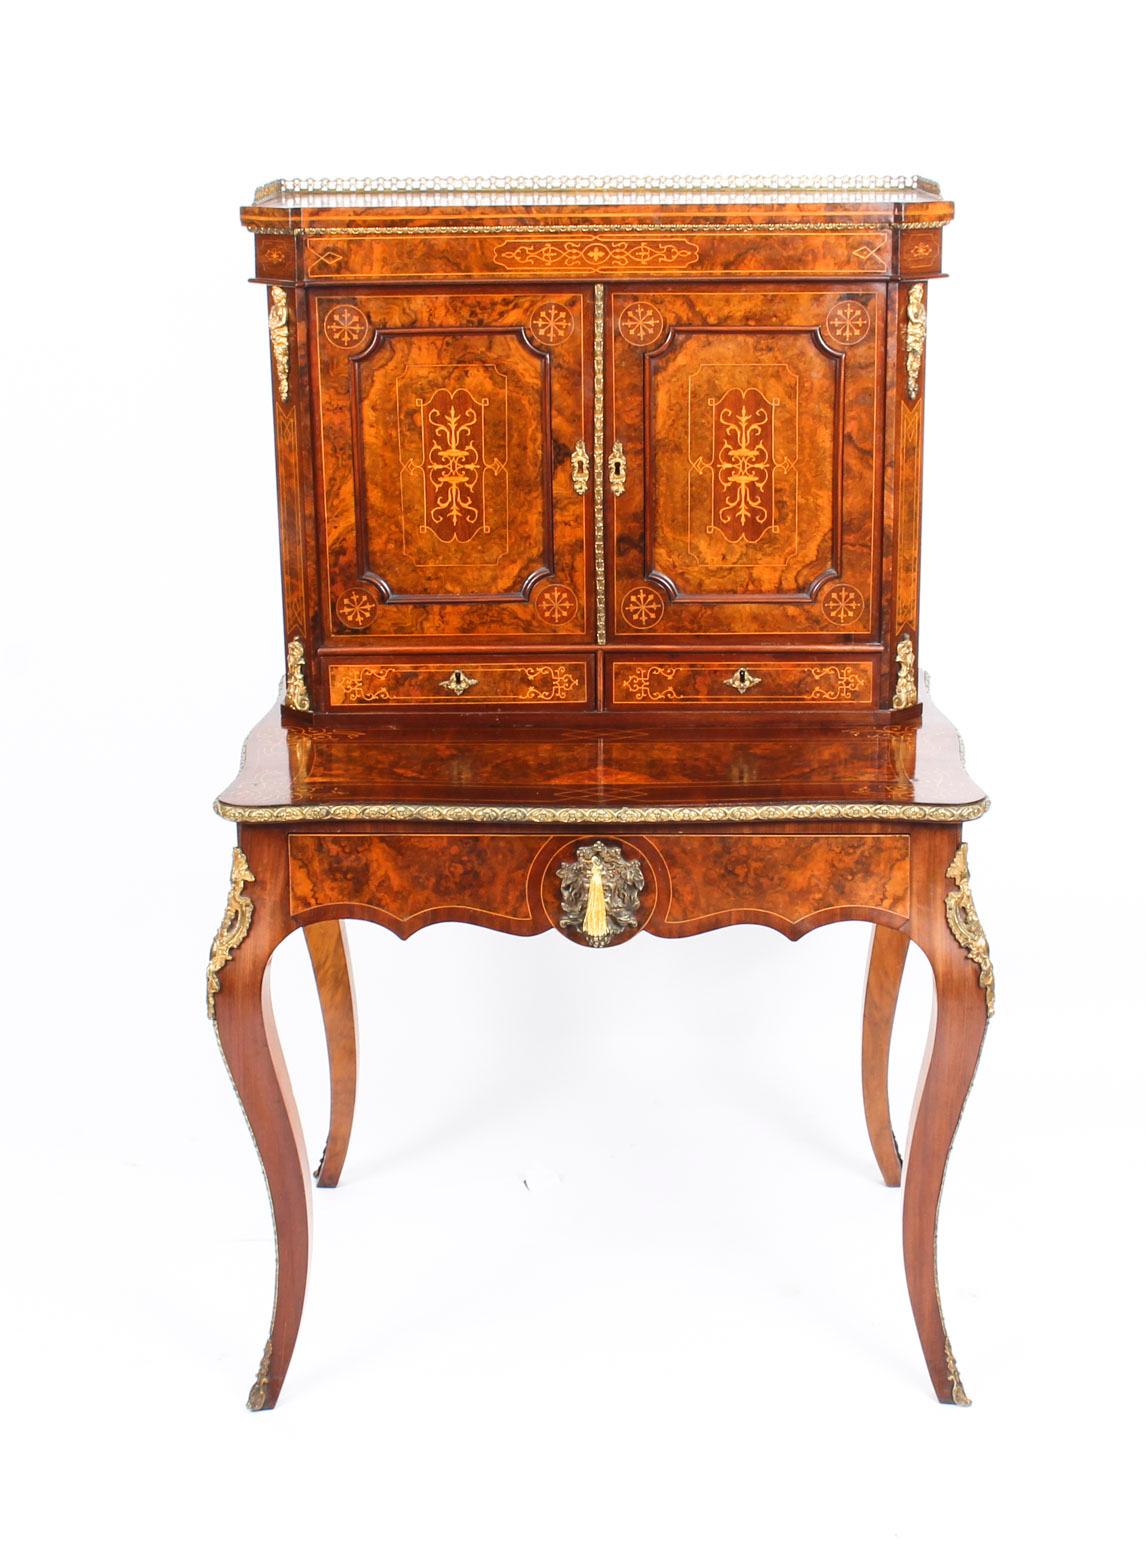 This is a gorgeous antique burr walnut, marquetry inlaid and ormolu-mounted Bonheur Du Jour or ladies writing desk, circa 1870 in date and bearing the maker stamp of the renowned London cabinet maker and retailer Edwards & Roberts.

This splendid